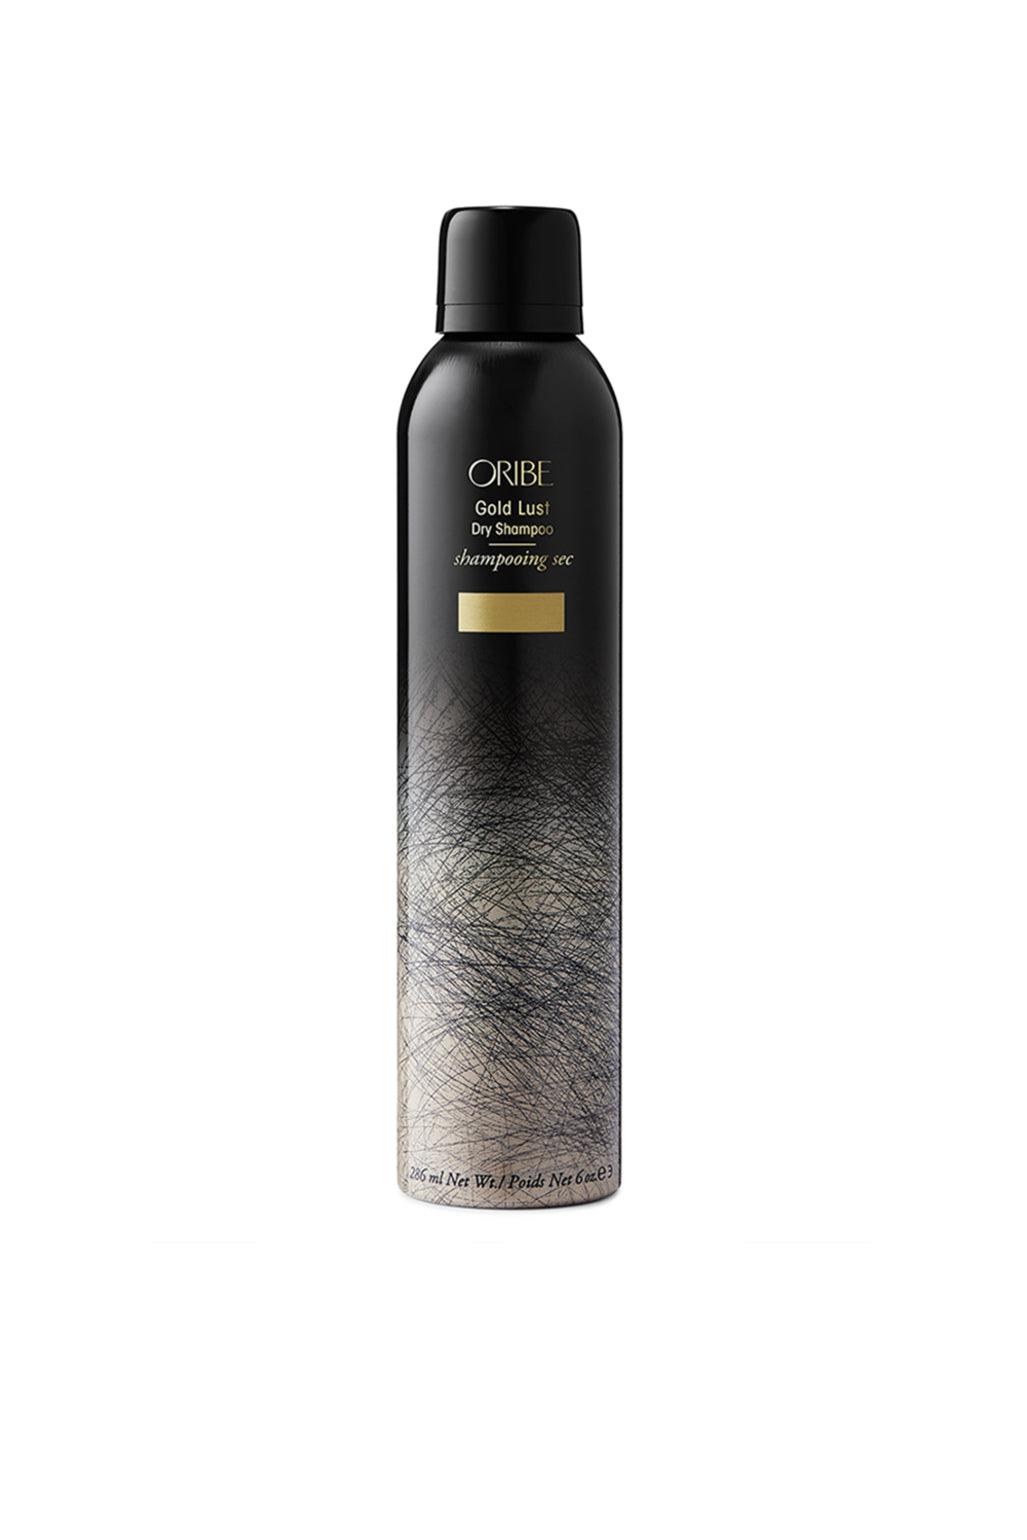 Gold Lust Dry Shampoo - The Coloroom 